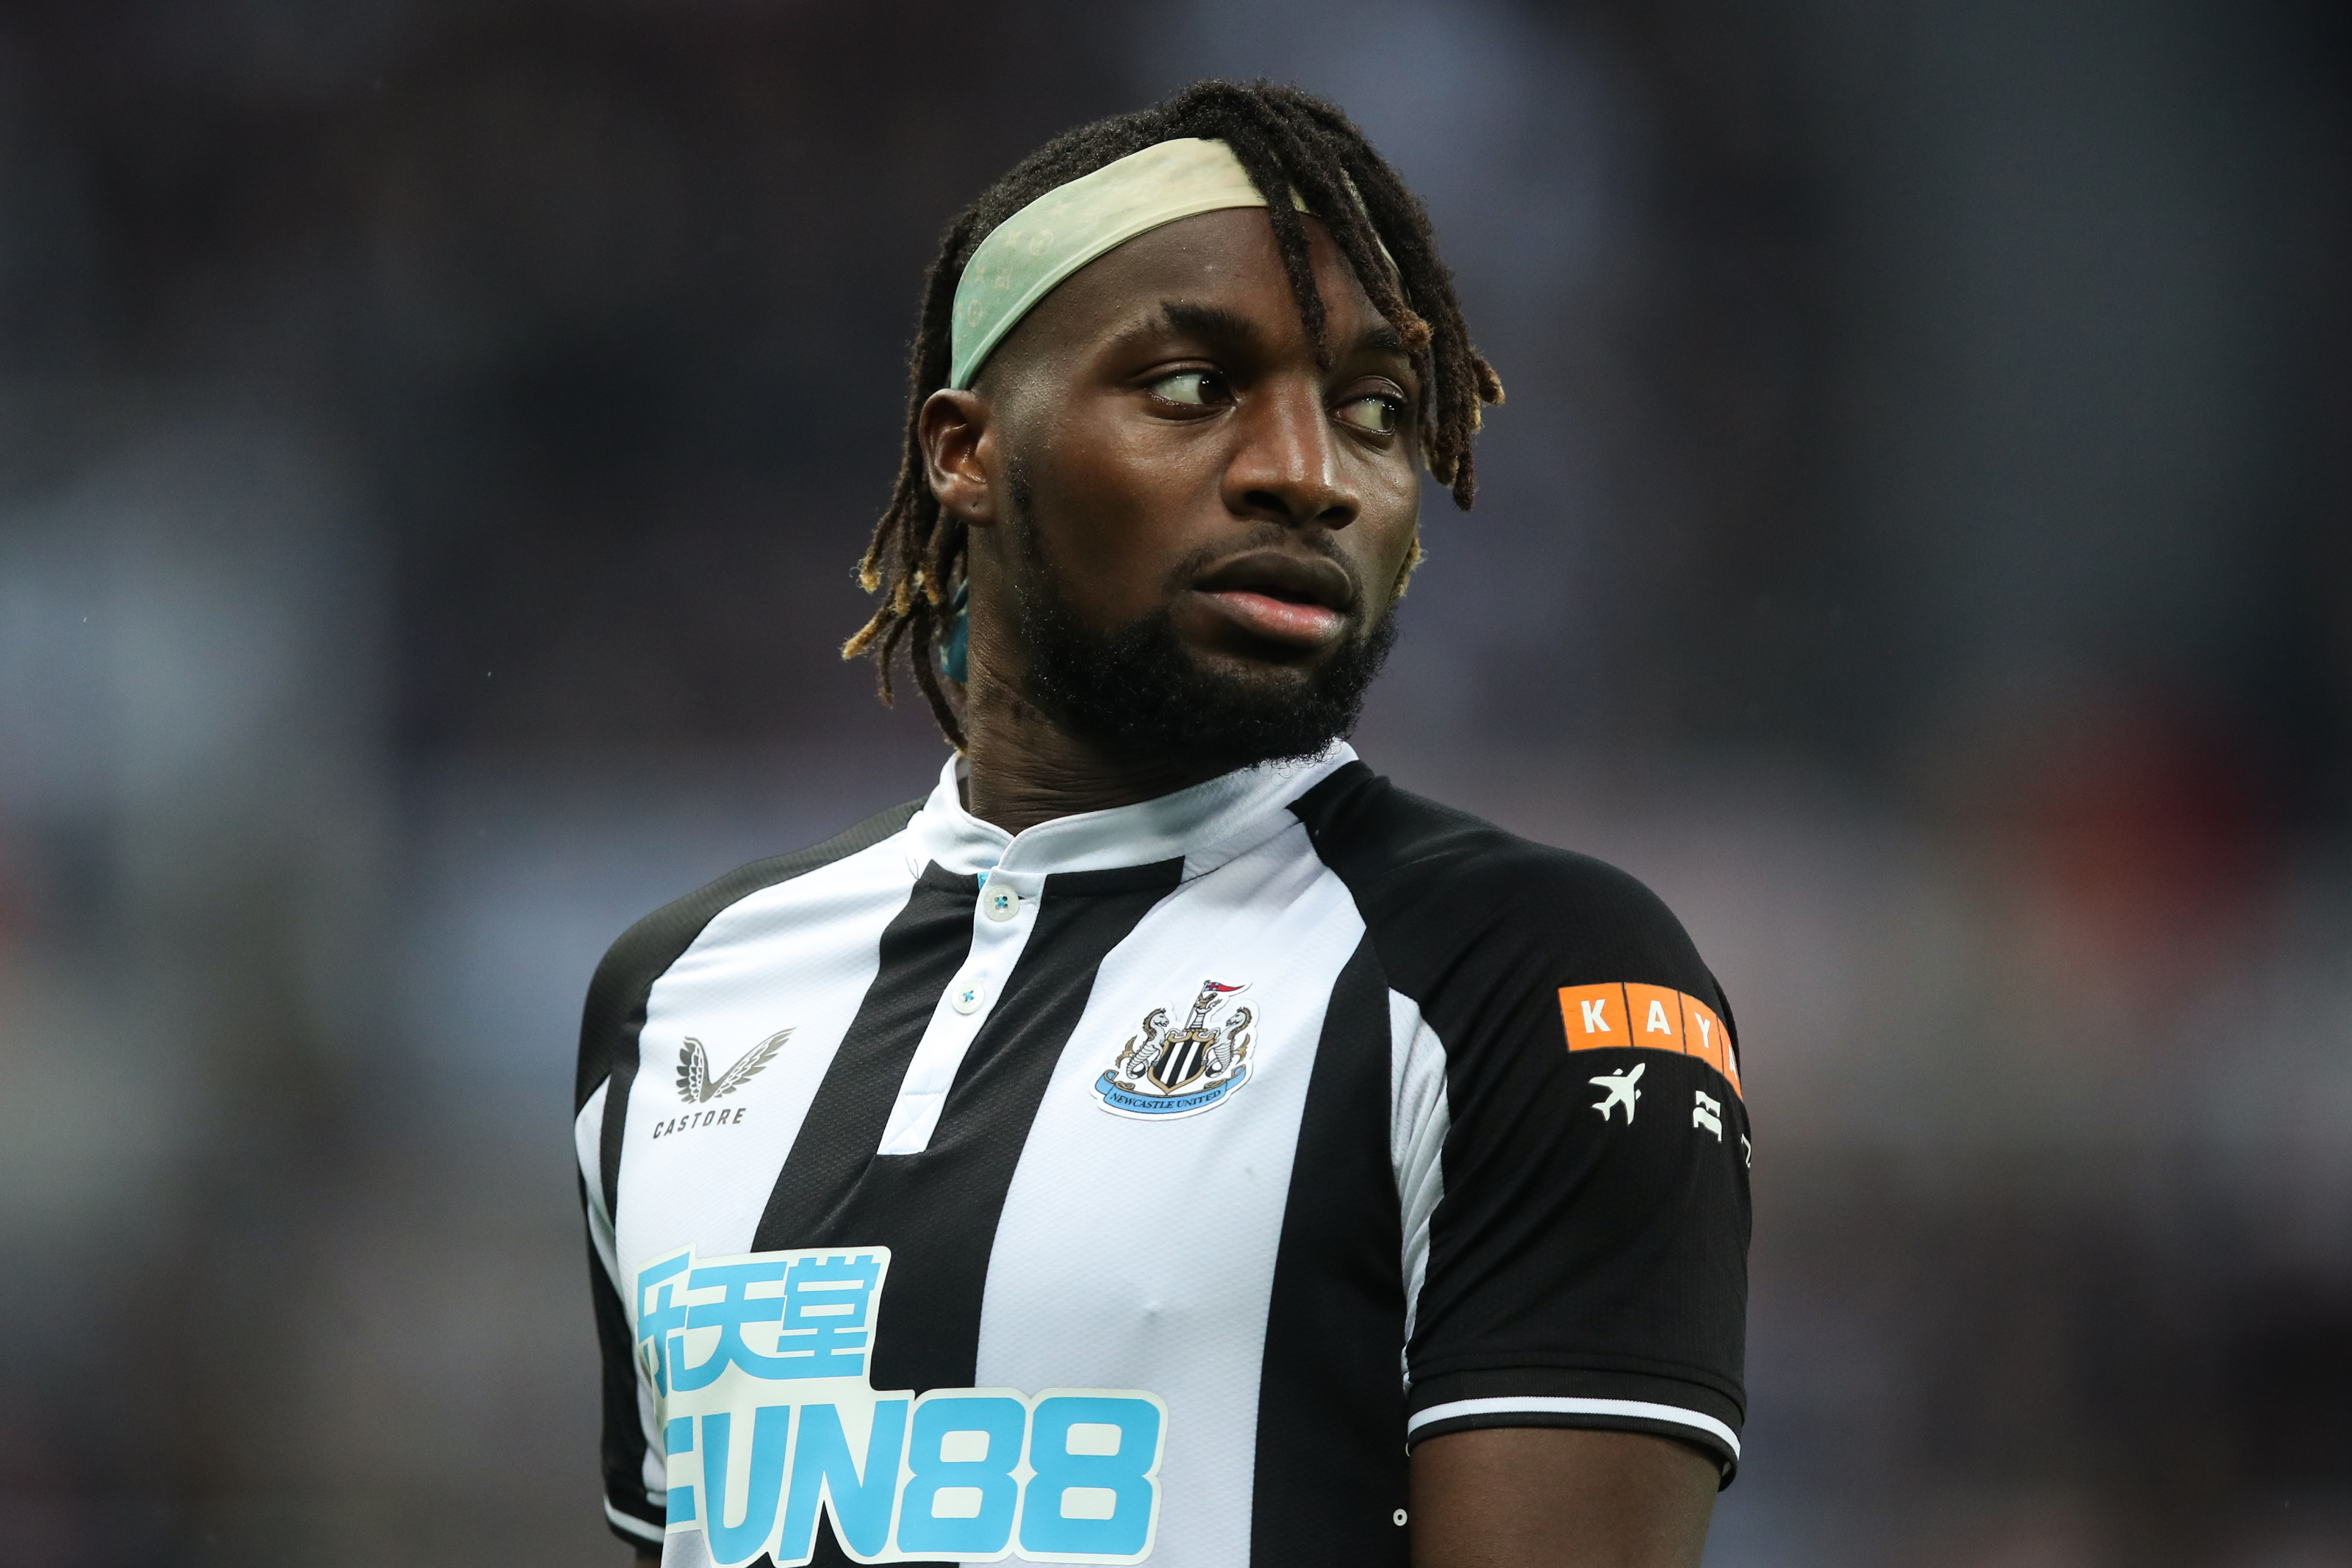 Allan Saint-Maximin of Newcastle United wearing a gold and black